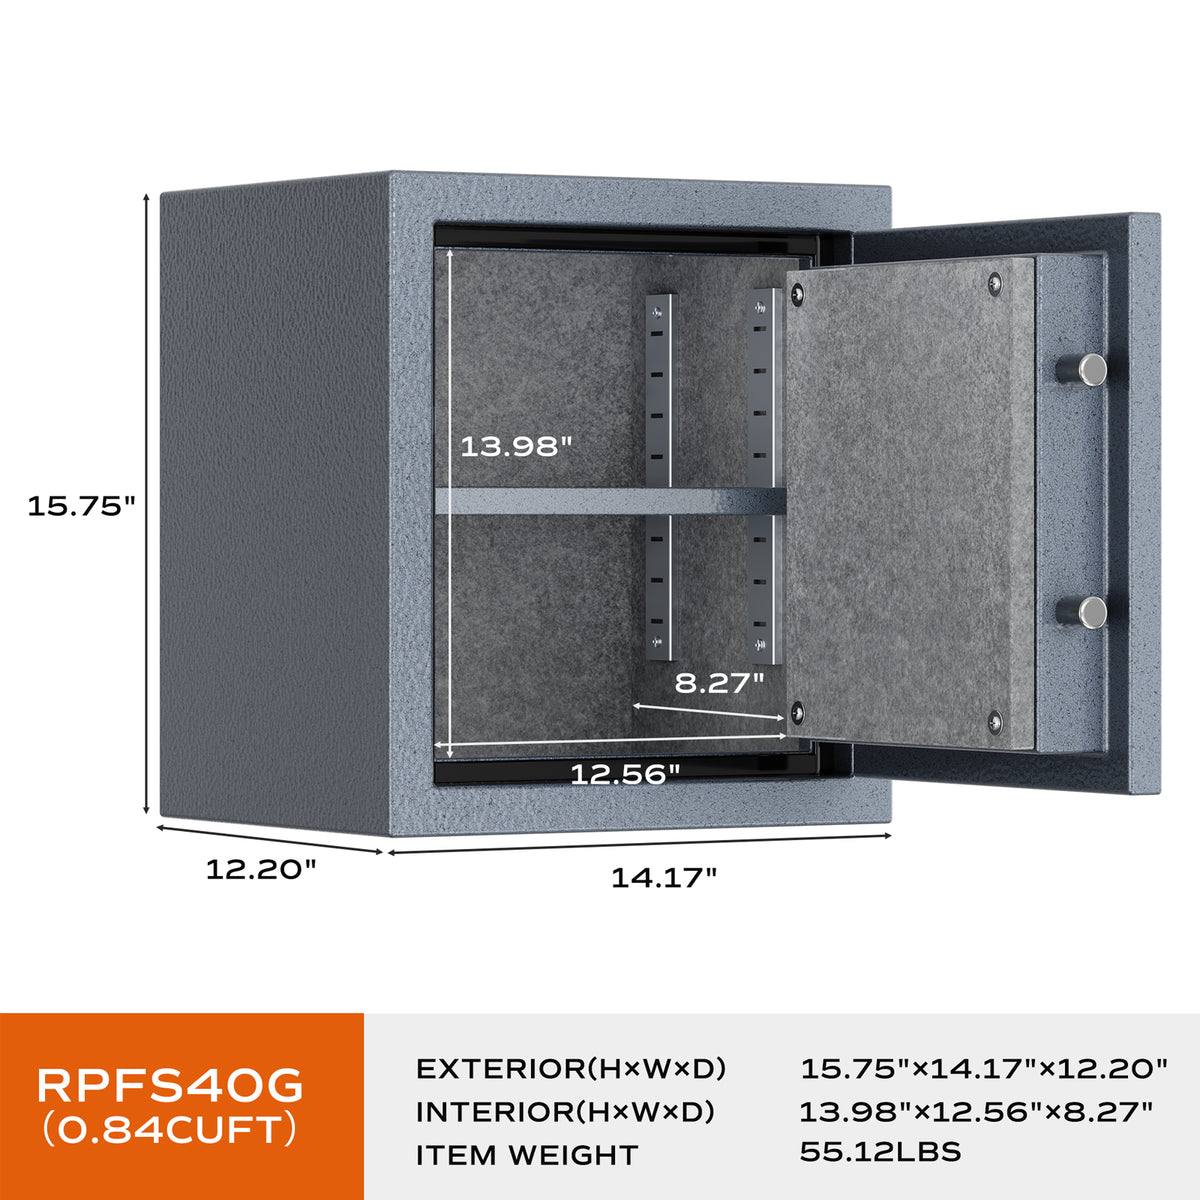 RPNB Grey Deluxe Fireproof Safe with Smart Touchscreen Keypad RPFS40G Specifications